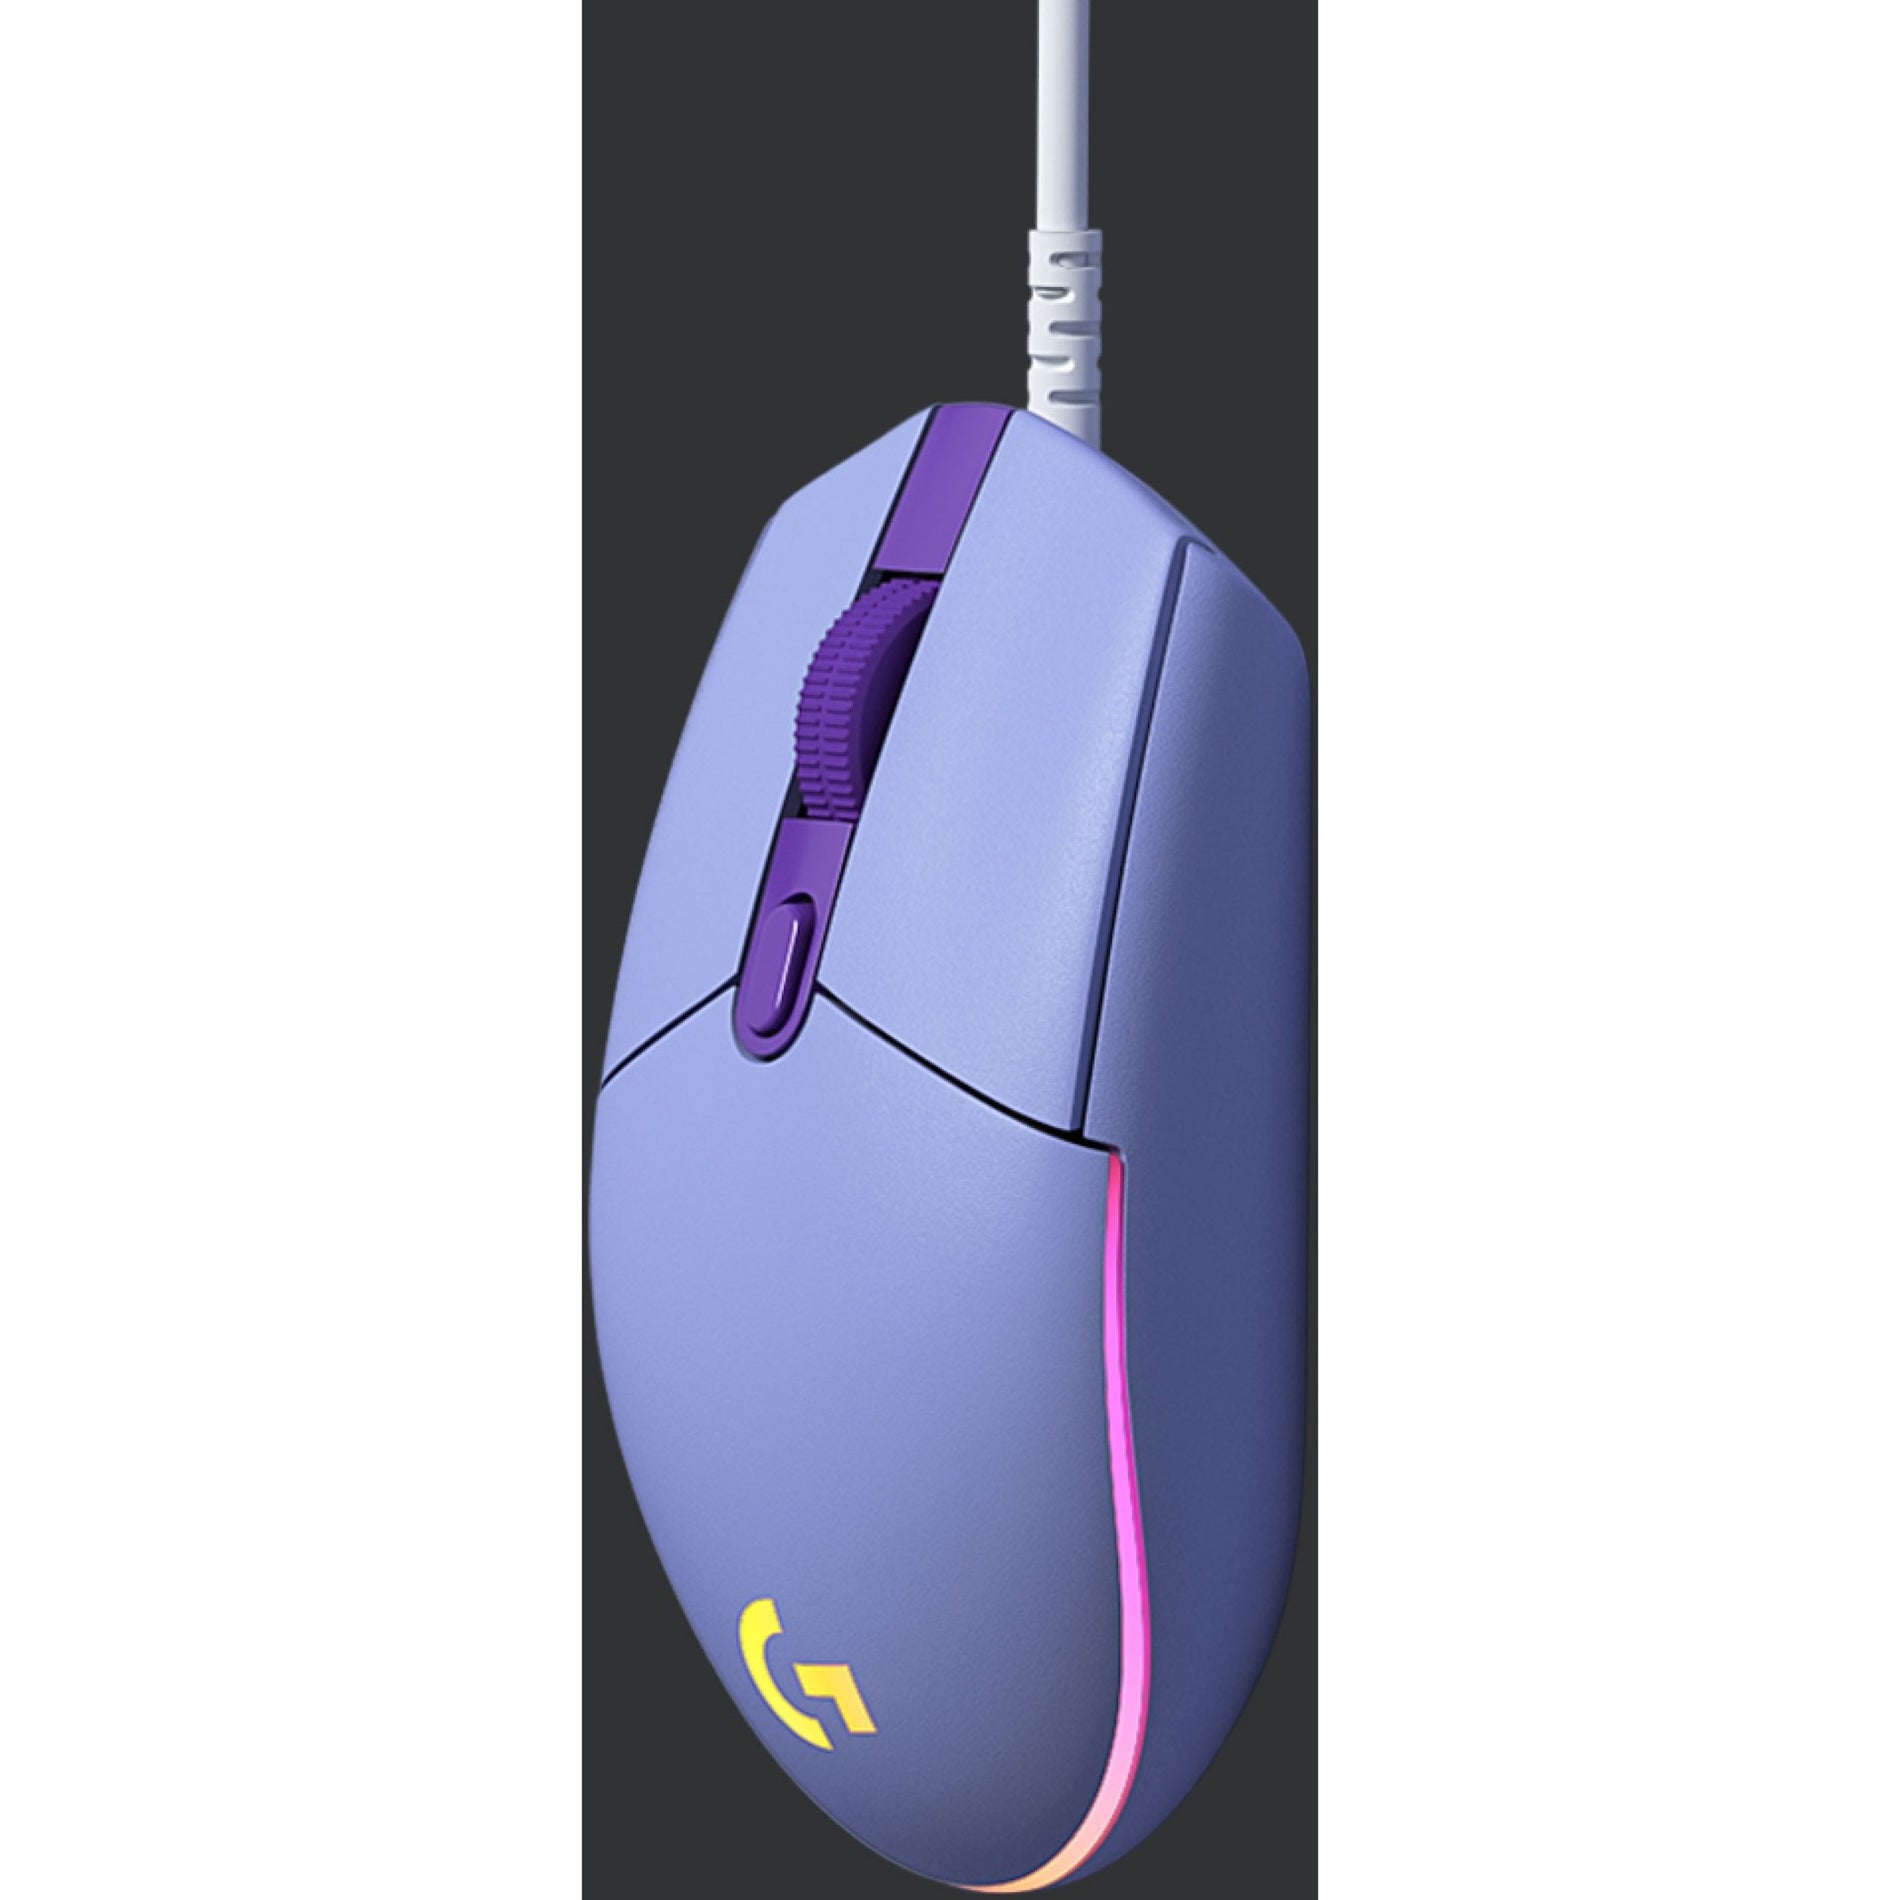 Logitech 910-005851 G203 Gaming Mouse, 6 Buttons, 8000 dpi, Lilac Color